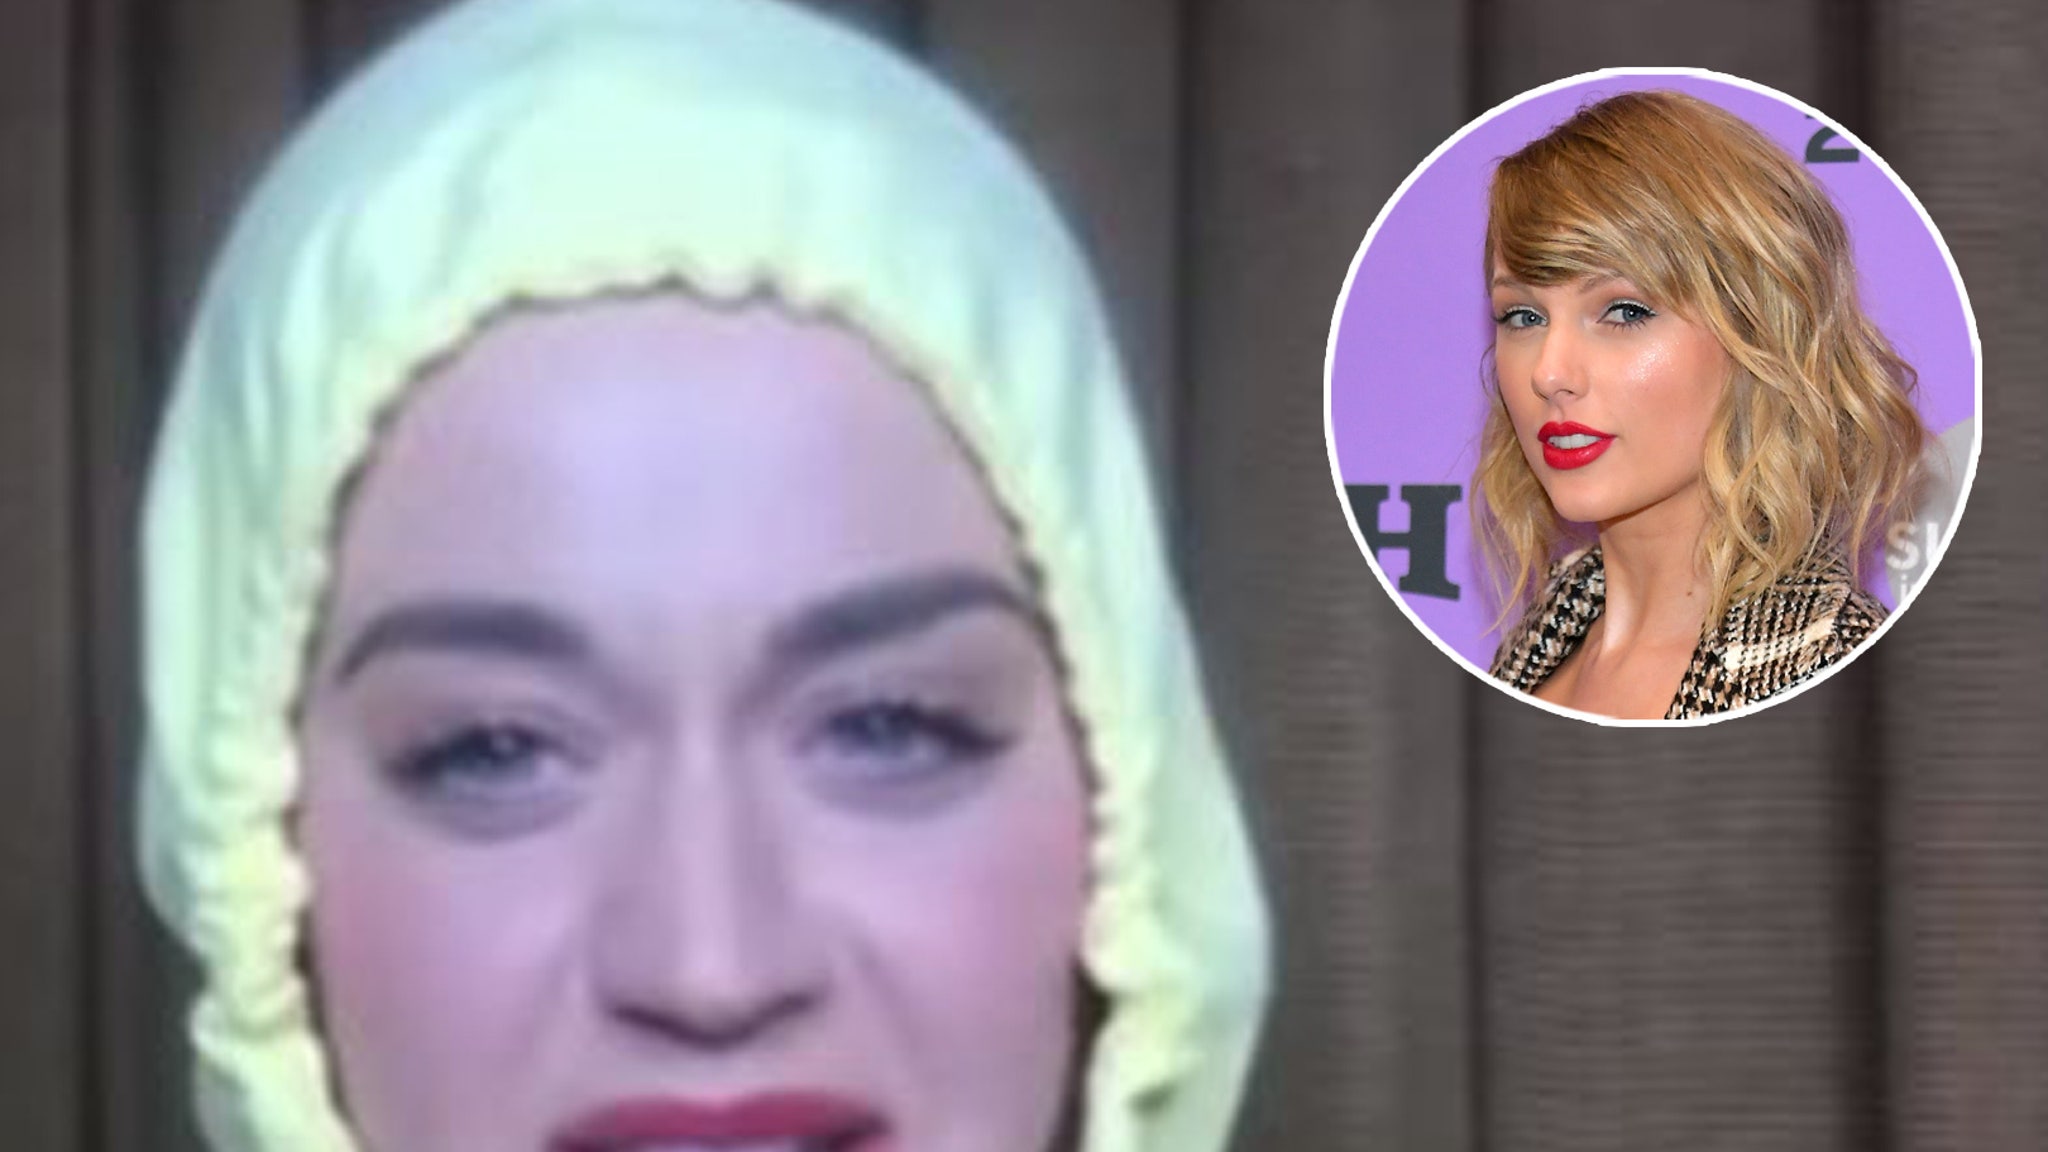 Katy Perry Says She and Taylor Swift 'Fight Like Cousins' - TooFab